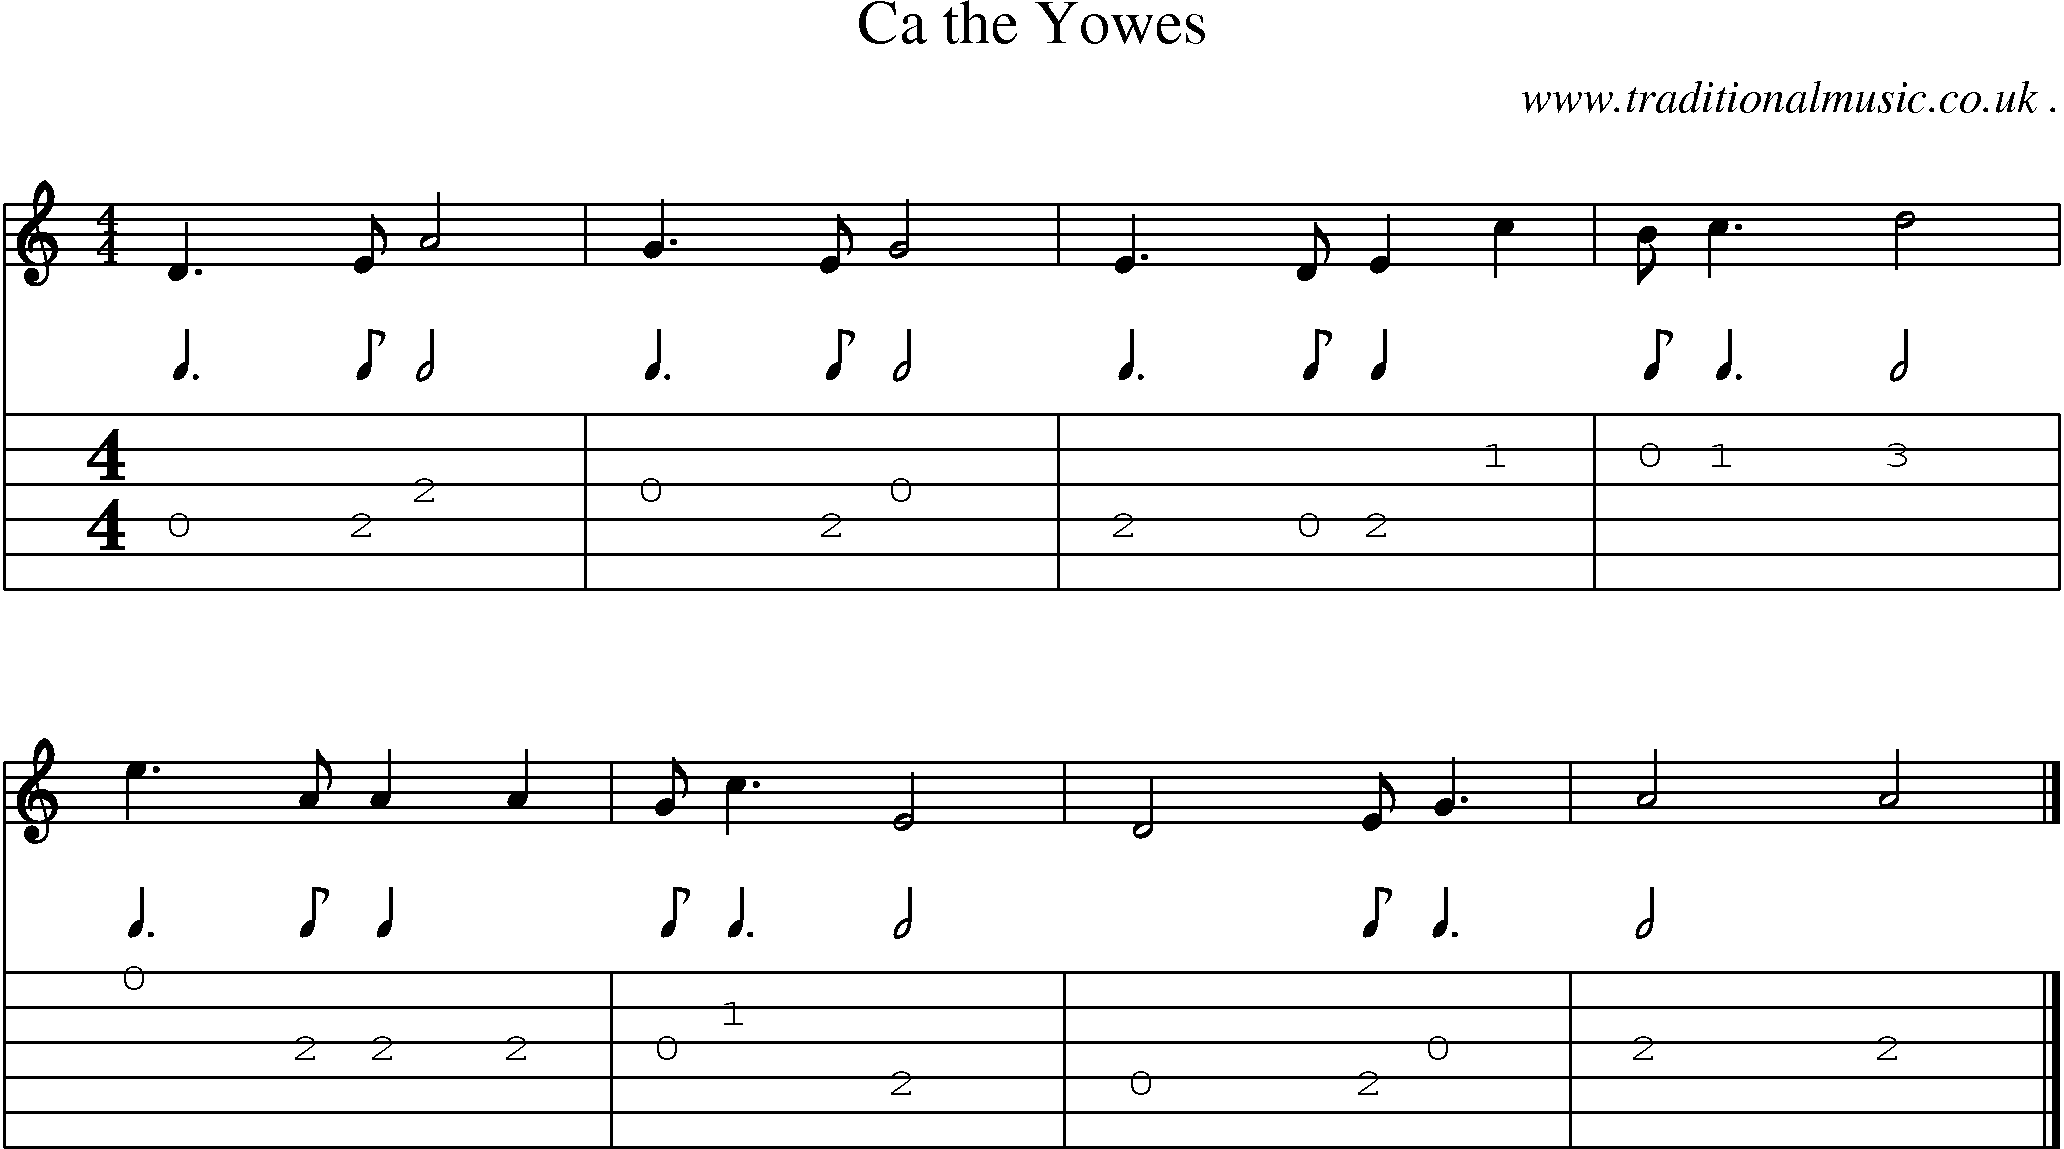 Sheet-music  score, Chords and Guitar Tabs for Ca The Yowes